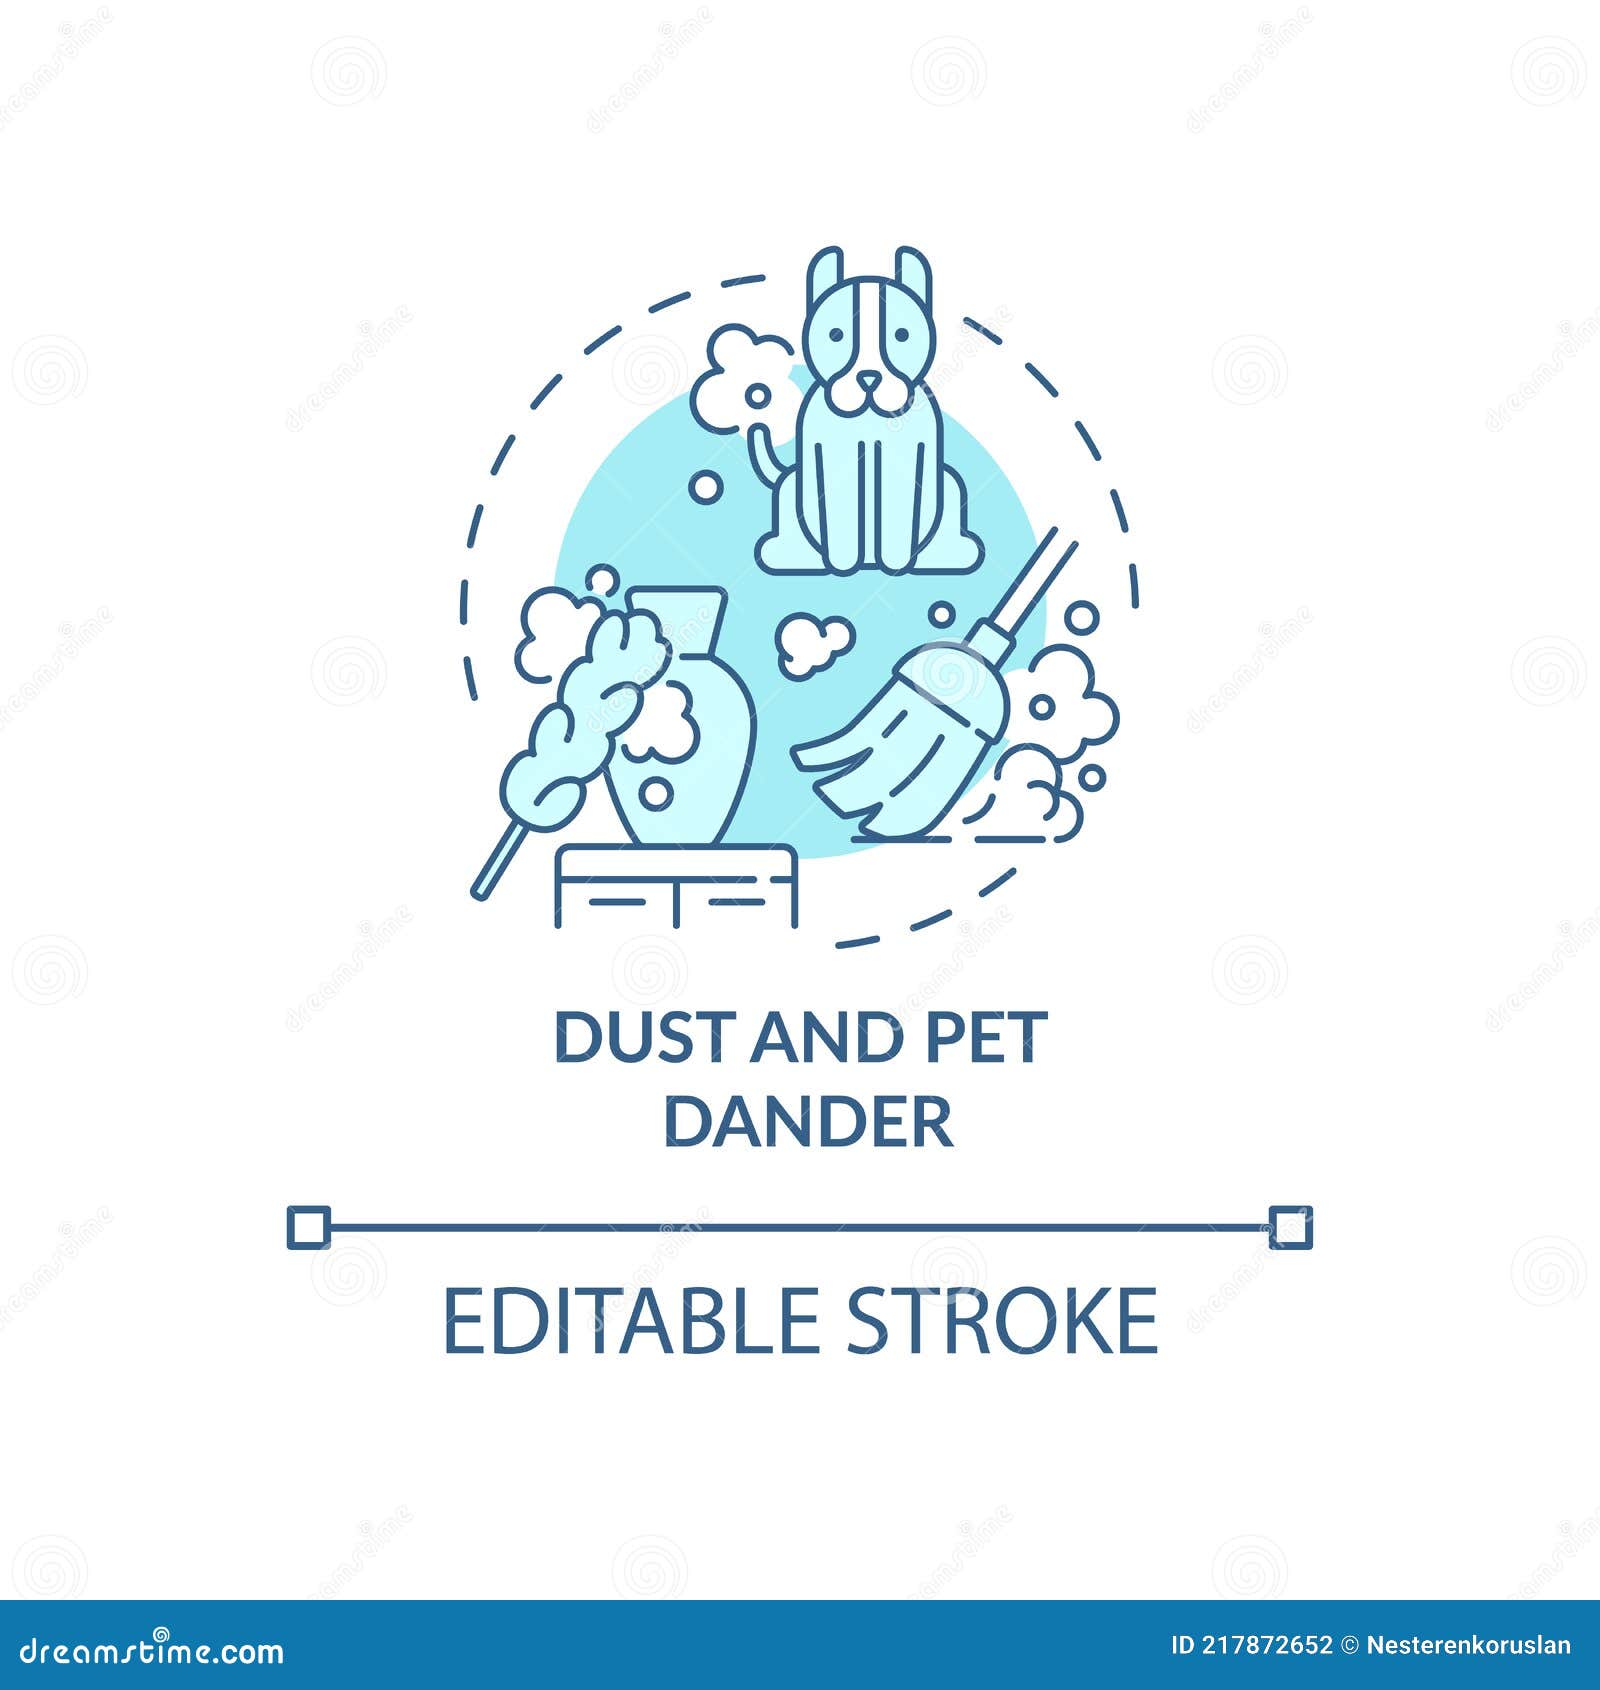 dust and pet dander concept icon